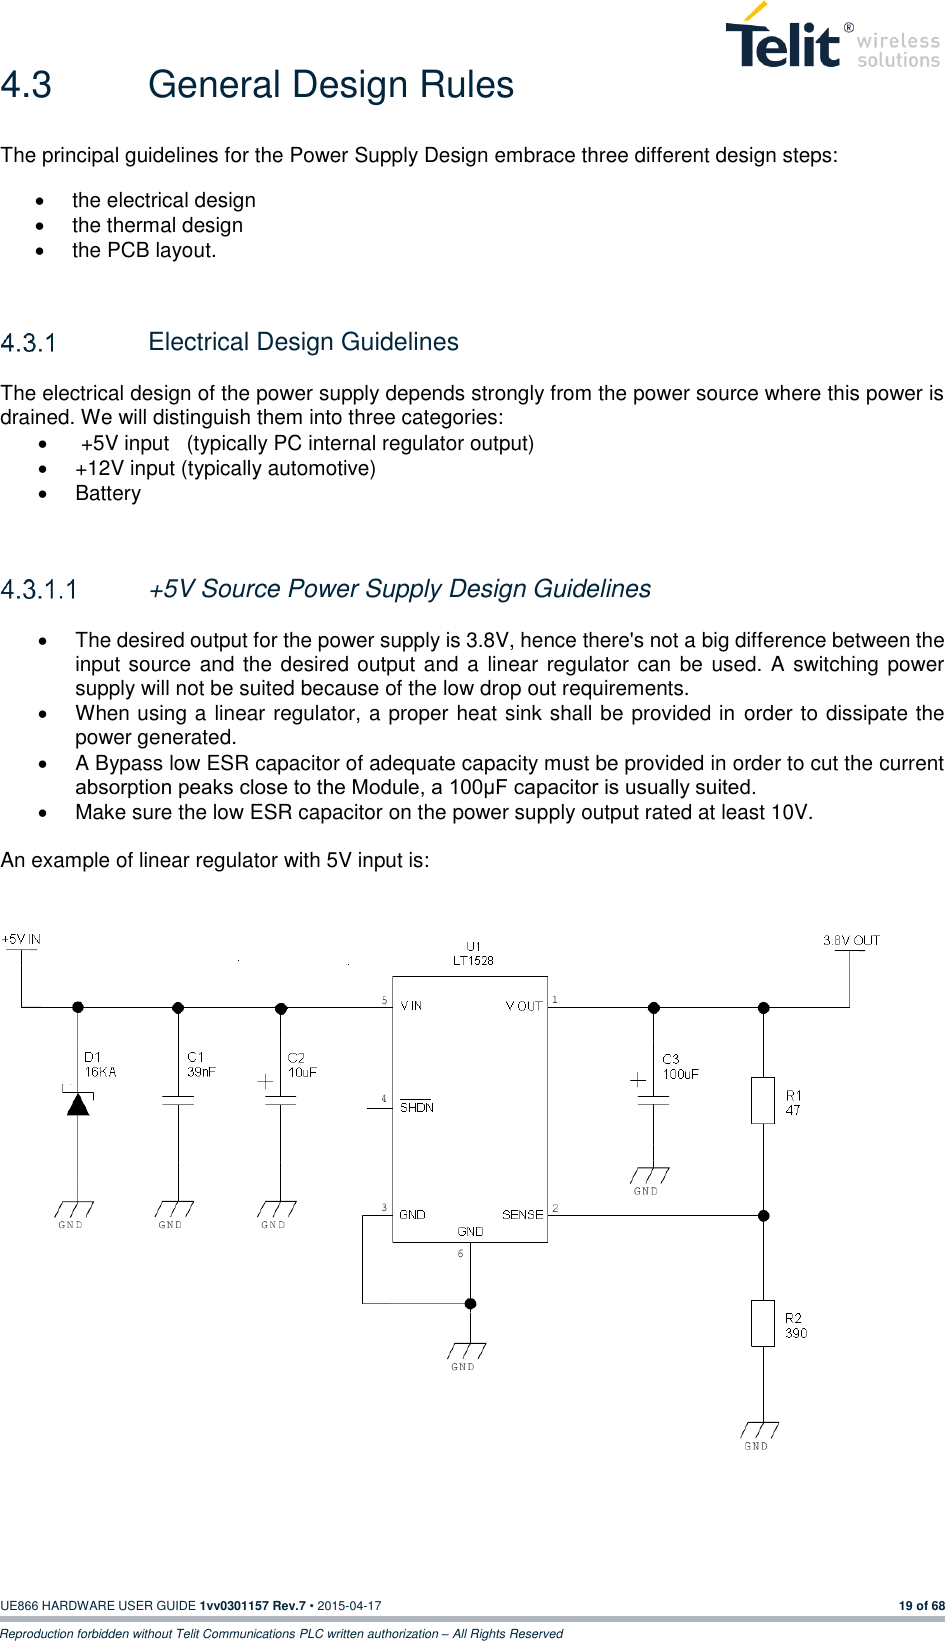  UE866 HARDWARE USER GUIDE 1vv0301157 Rev.7 • 2015-04-17 19 of 68 Reproduction forbidden without Telit Communications PLC written authorization – All Rights Reserved 4.3  General Design Rules The principal guidelines for the Power Supply Design embrace three different design steps:   the electrical design   the thermal design   the PCB layout.     Electrical Design Guidelines The electrical design of the power supply depends strongly from the power source where this power is drained. We will distinguish them into three categories:    +5V input   (typically PC internal regulator output)   +12V input (typically automotive)   Battery    +5V Source Power Supply Design Guidelines    The desired output for the power supply is 3.8V, hence there&apos;s not a big difference between the input source and the desired output and a linear regulator  can  be  used. A switching power supply will not be suited because of the low drop out requirements.   When using a linear regulator, a proper heat sink shall be provided in order to dissipate the power generated.   A Bypass low ESR capacitor of adequate capacity must be provided in order to cut the current absorption peaks close to the Module, a 100μF capacitor is usually suited.   Make sure the low ESR capacitor on the power supply output rated at least 10V.  An example of linear regulator with 5V input is:      